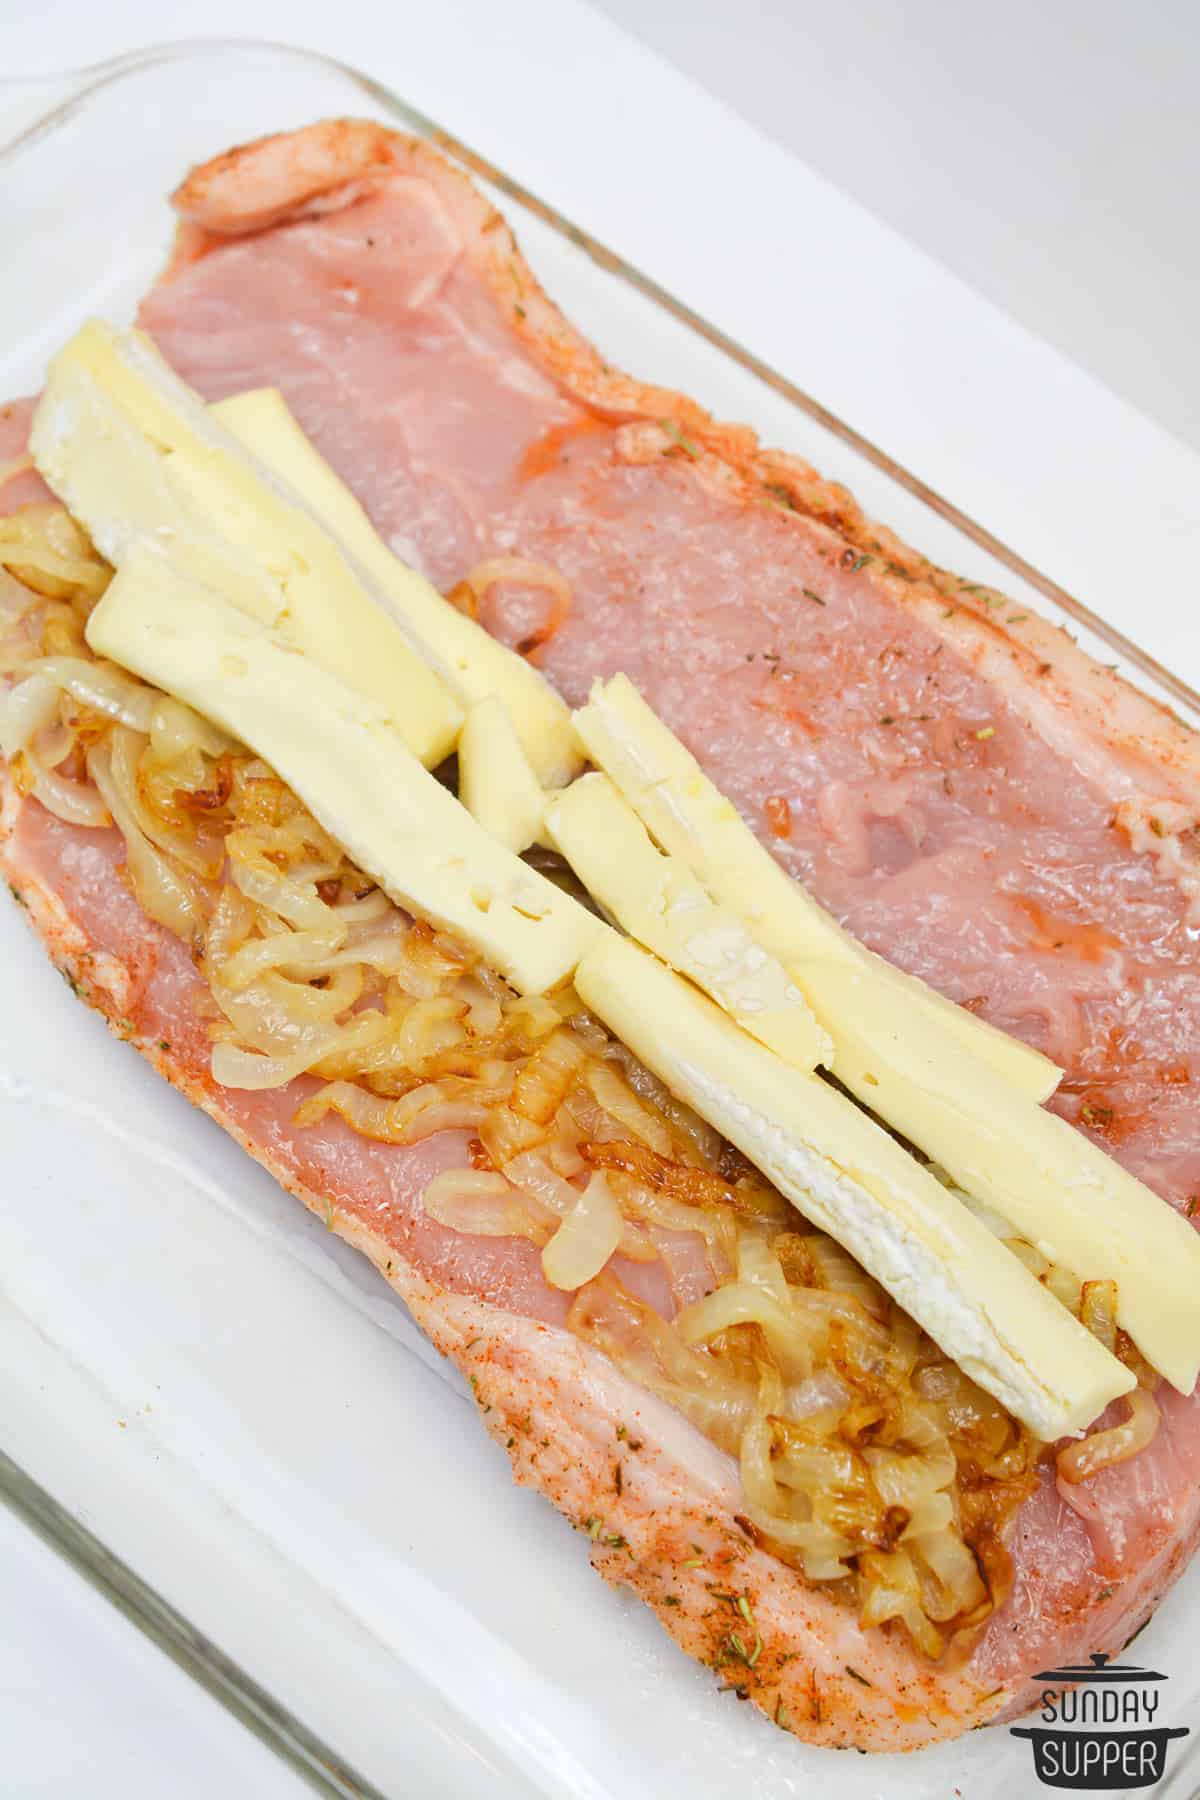 The sliced open pork tenderloin with onions and brie cheese slices layered inside